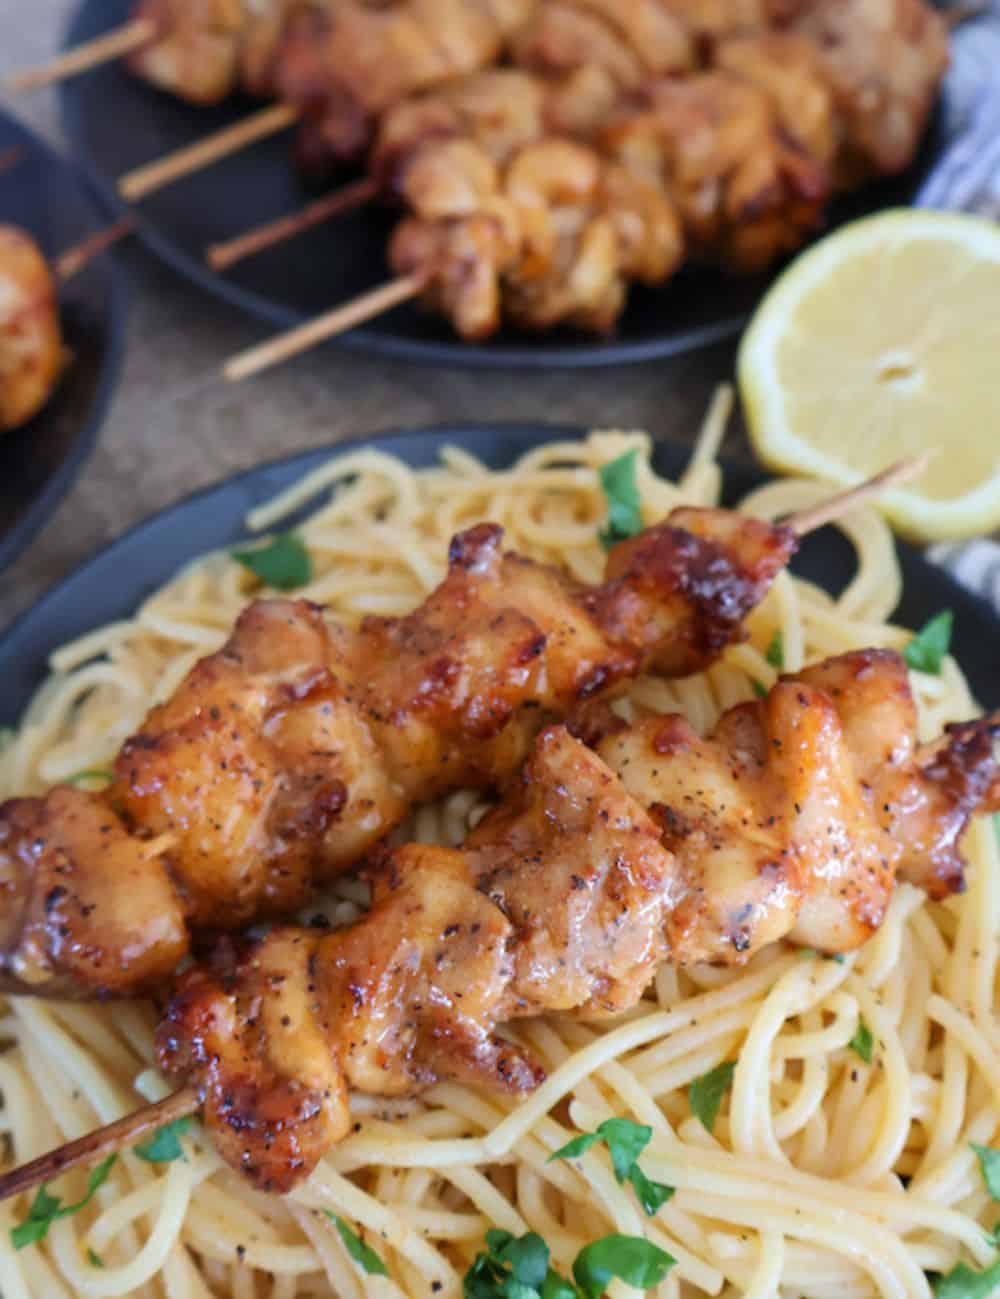 Chicken skewers with a pasta on the side